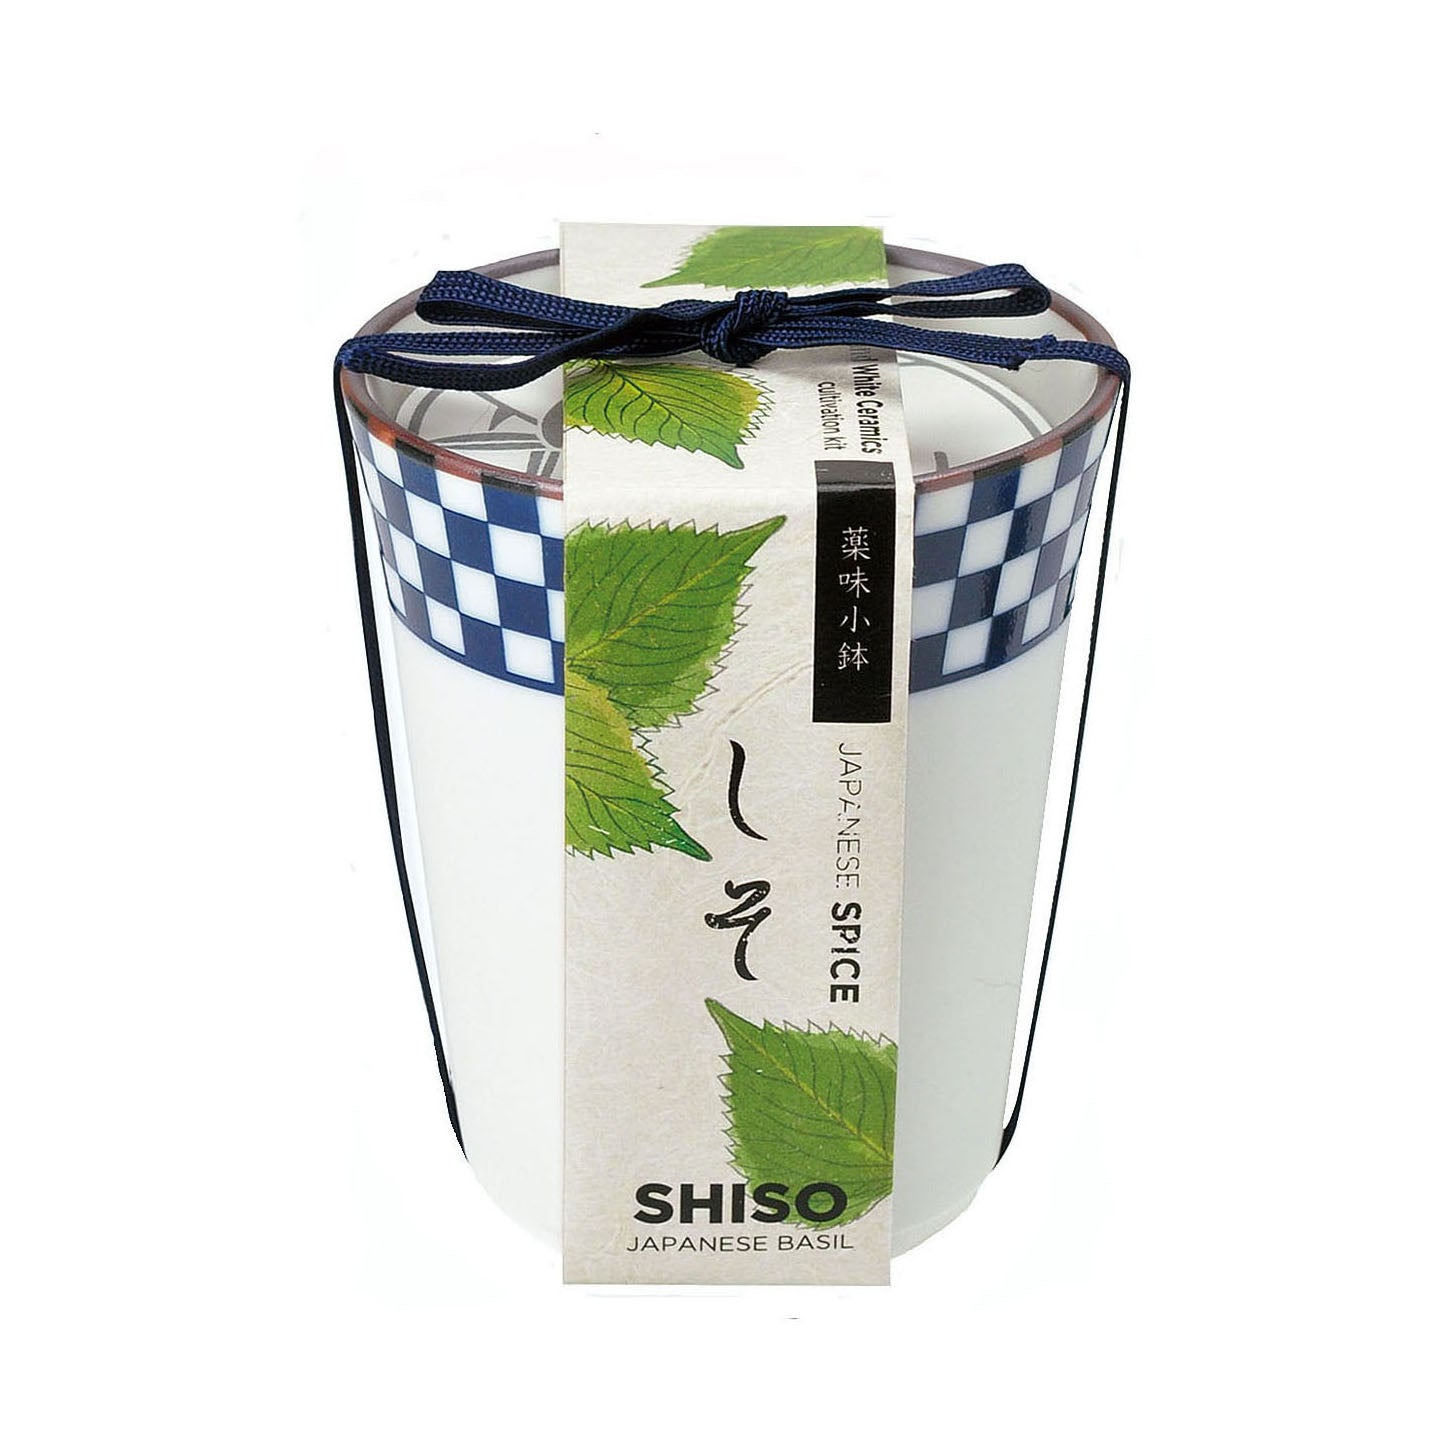 Grow Your Own Japanese Herbs Kit in a Ceramic Pot - Shiso